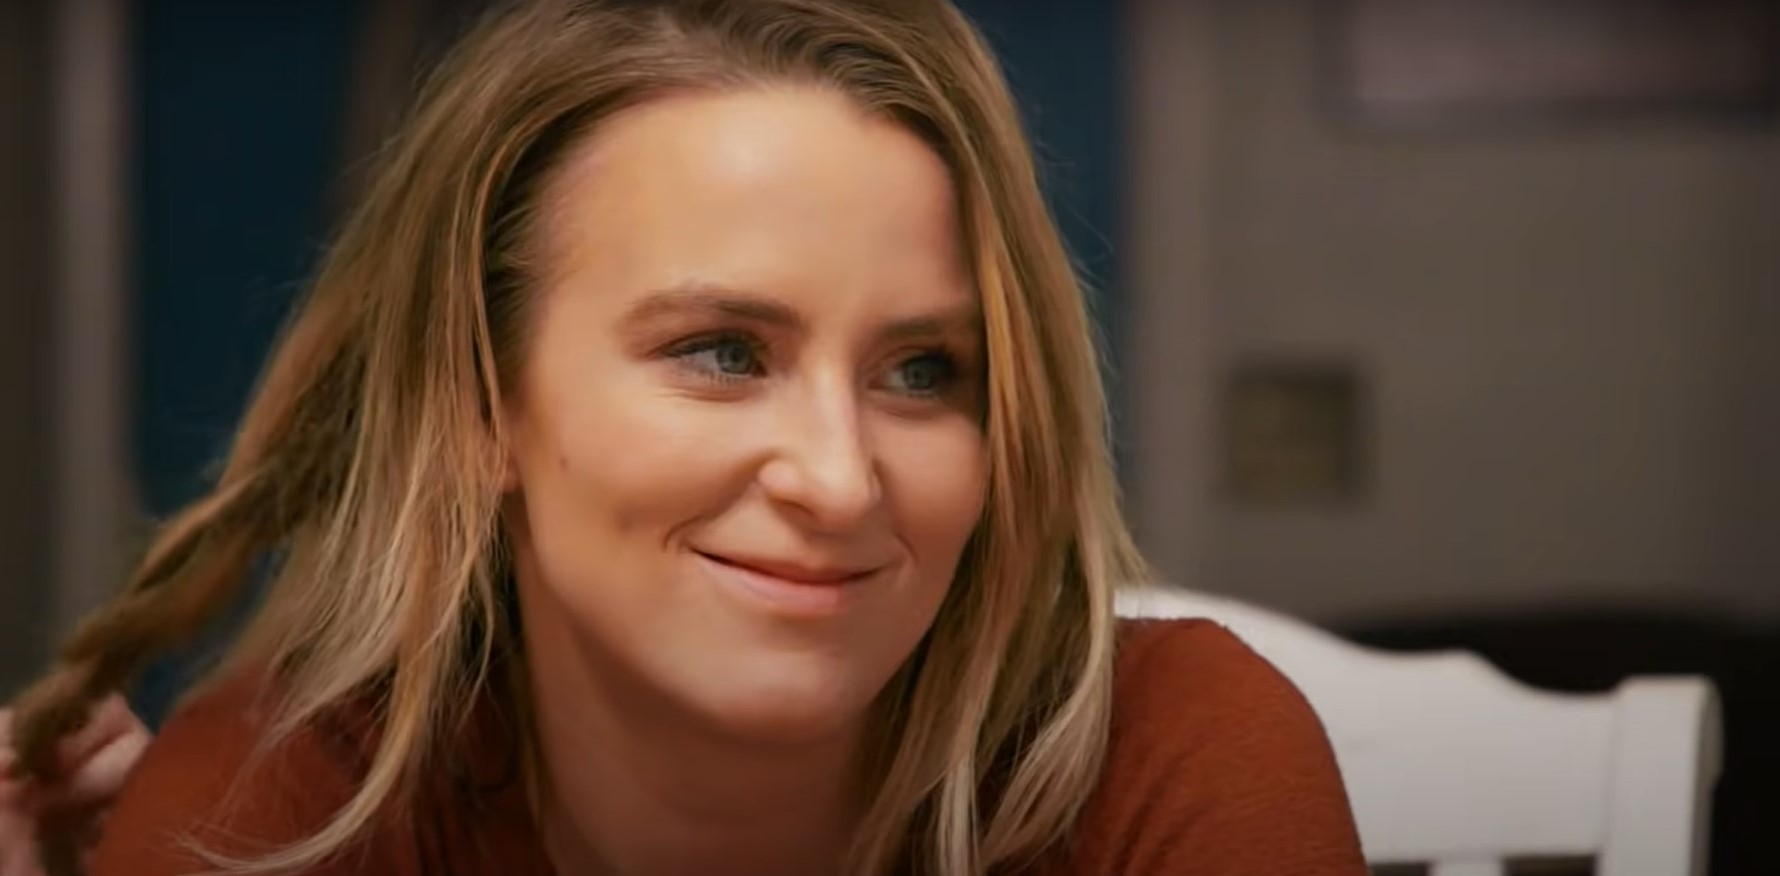 What is Teen Mom's Leah Messer's Net Worth?